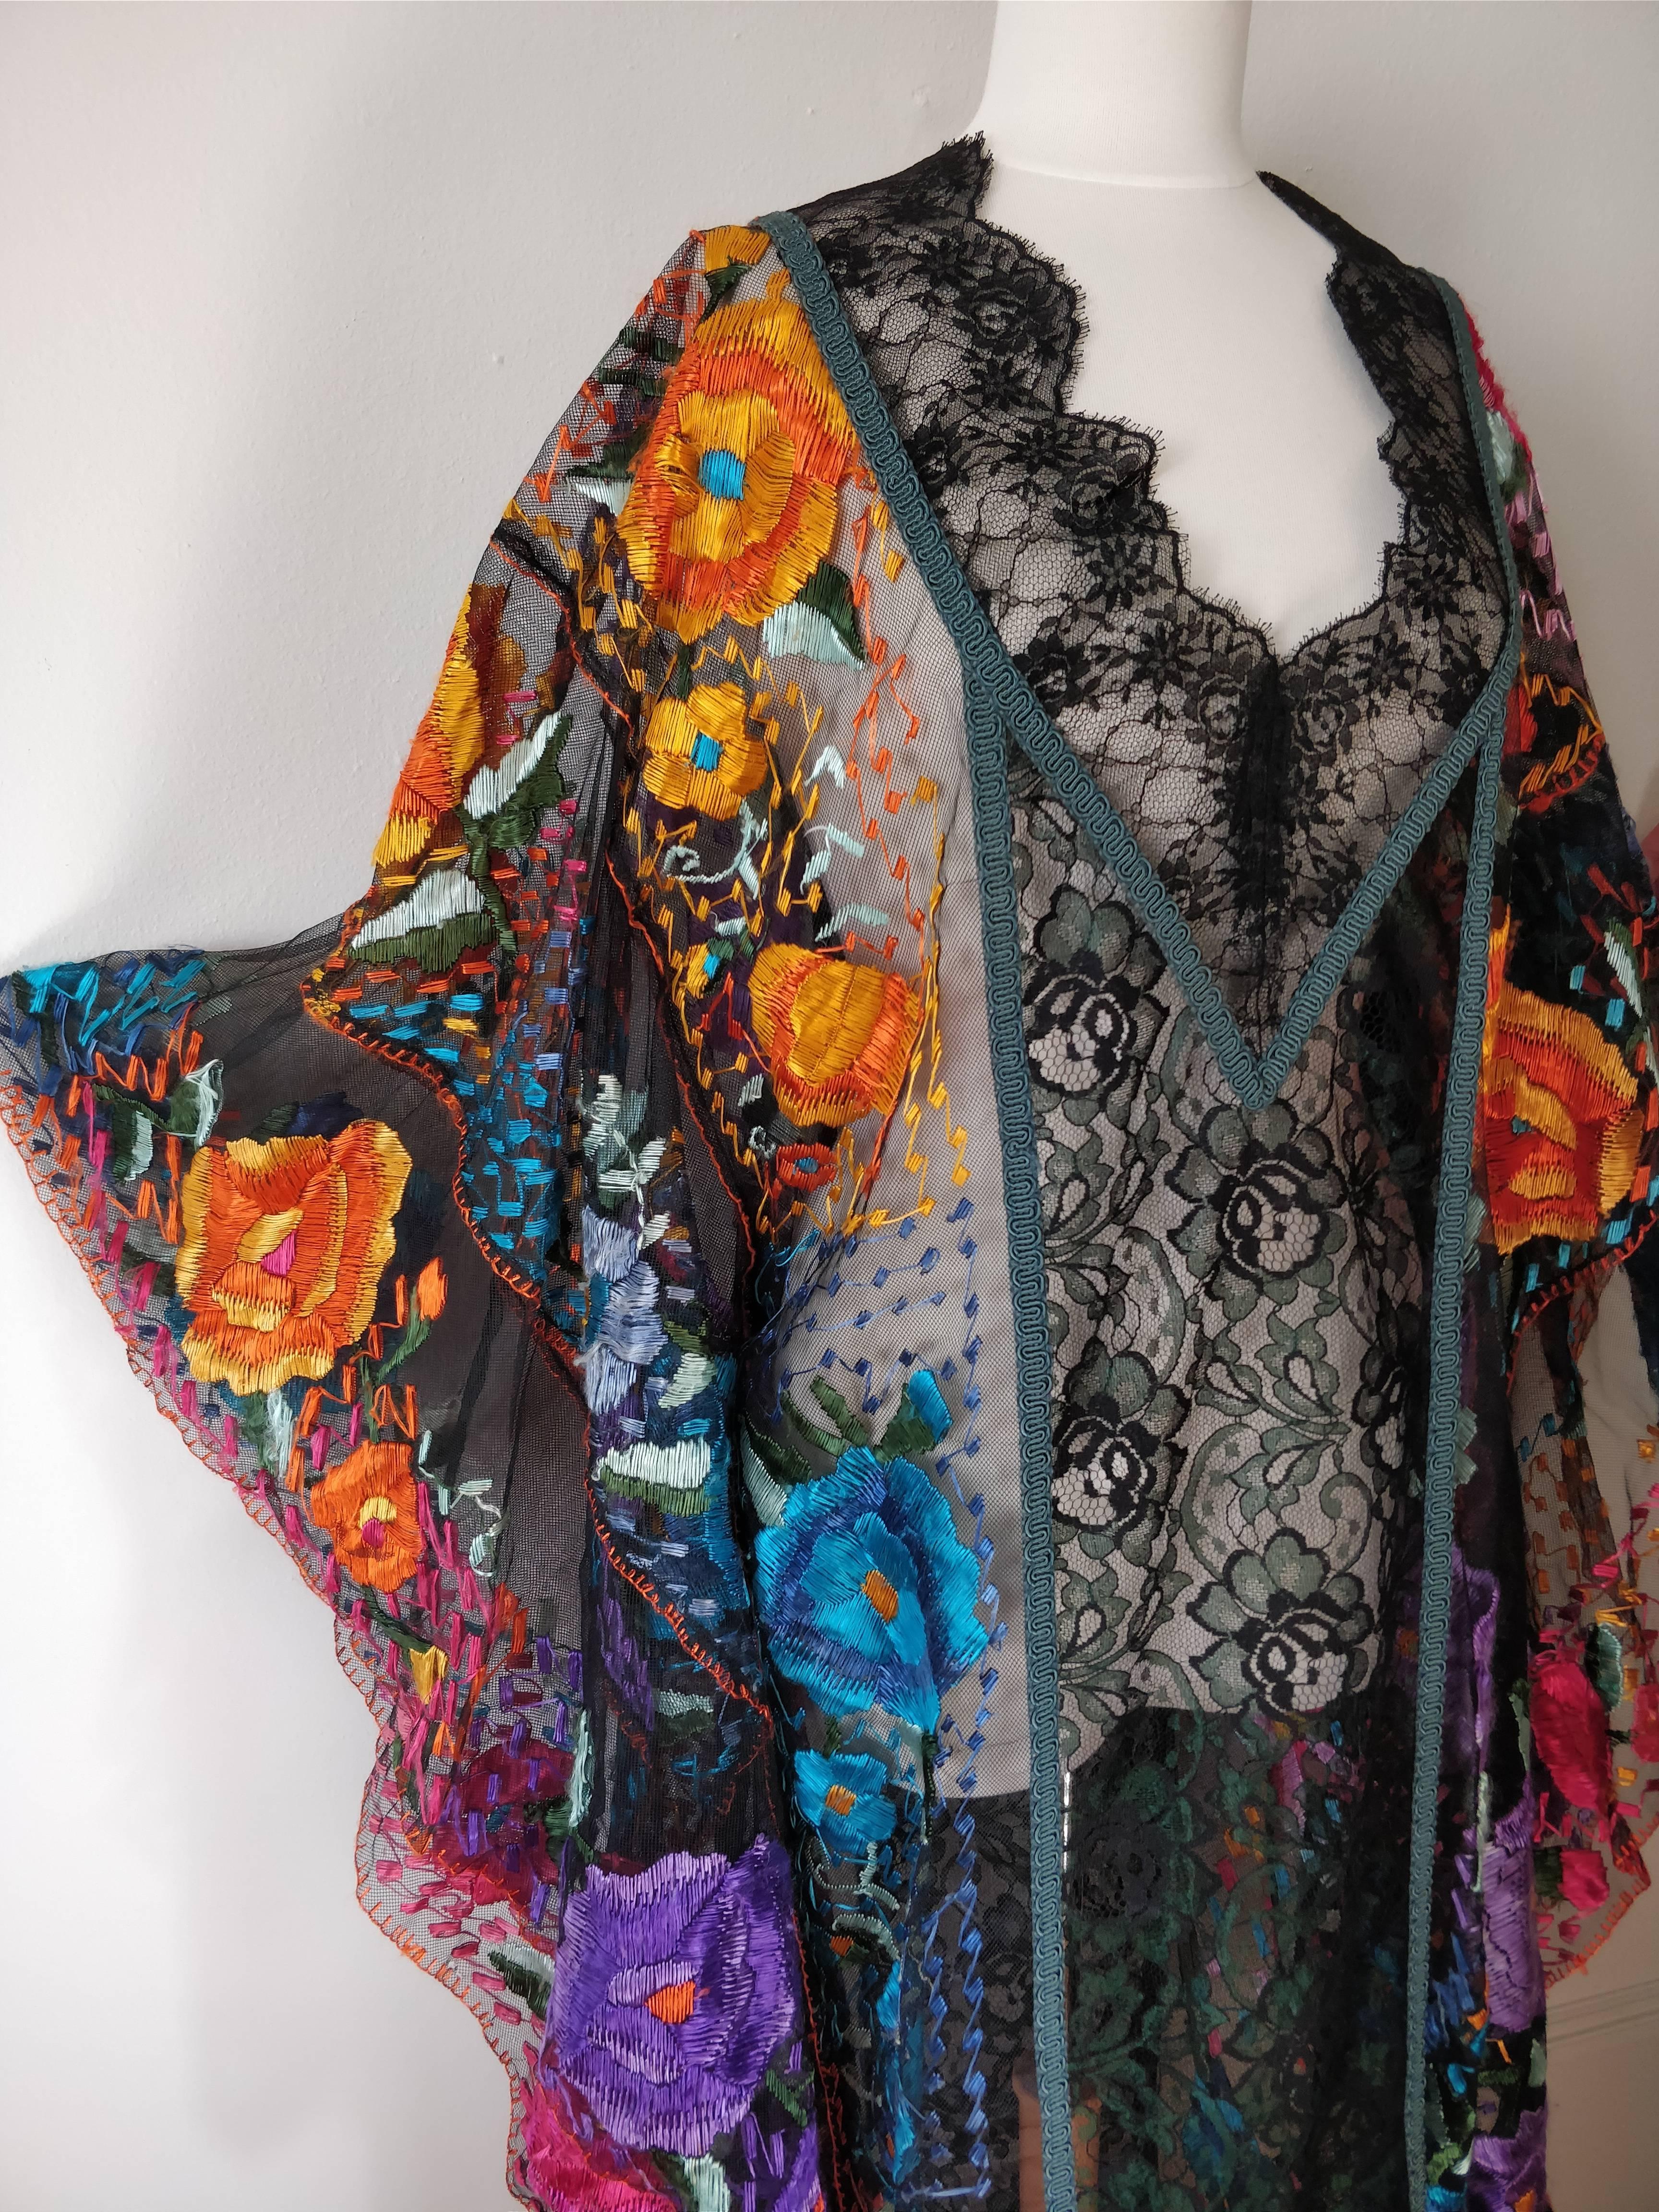 Women's or Men's 1950s Caftan with Traditional Mexican Embroidery Panels and Mixed Lace